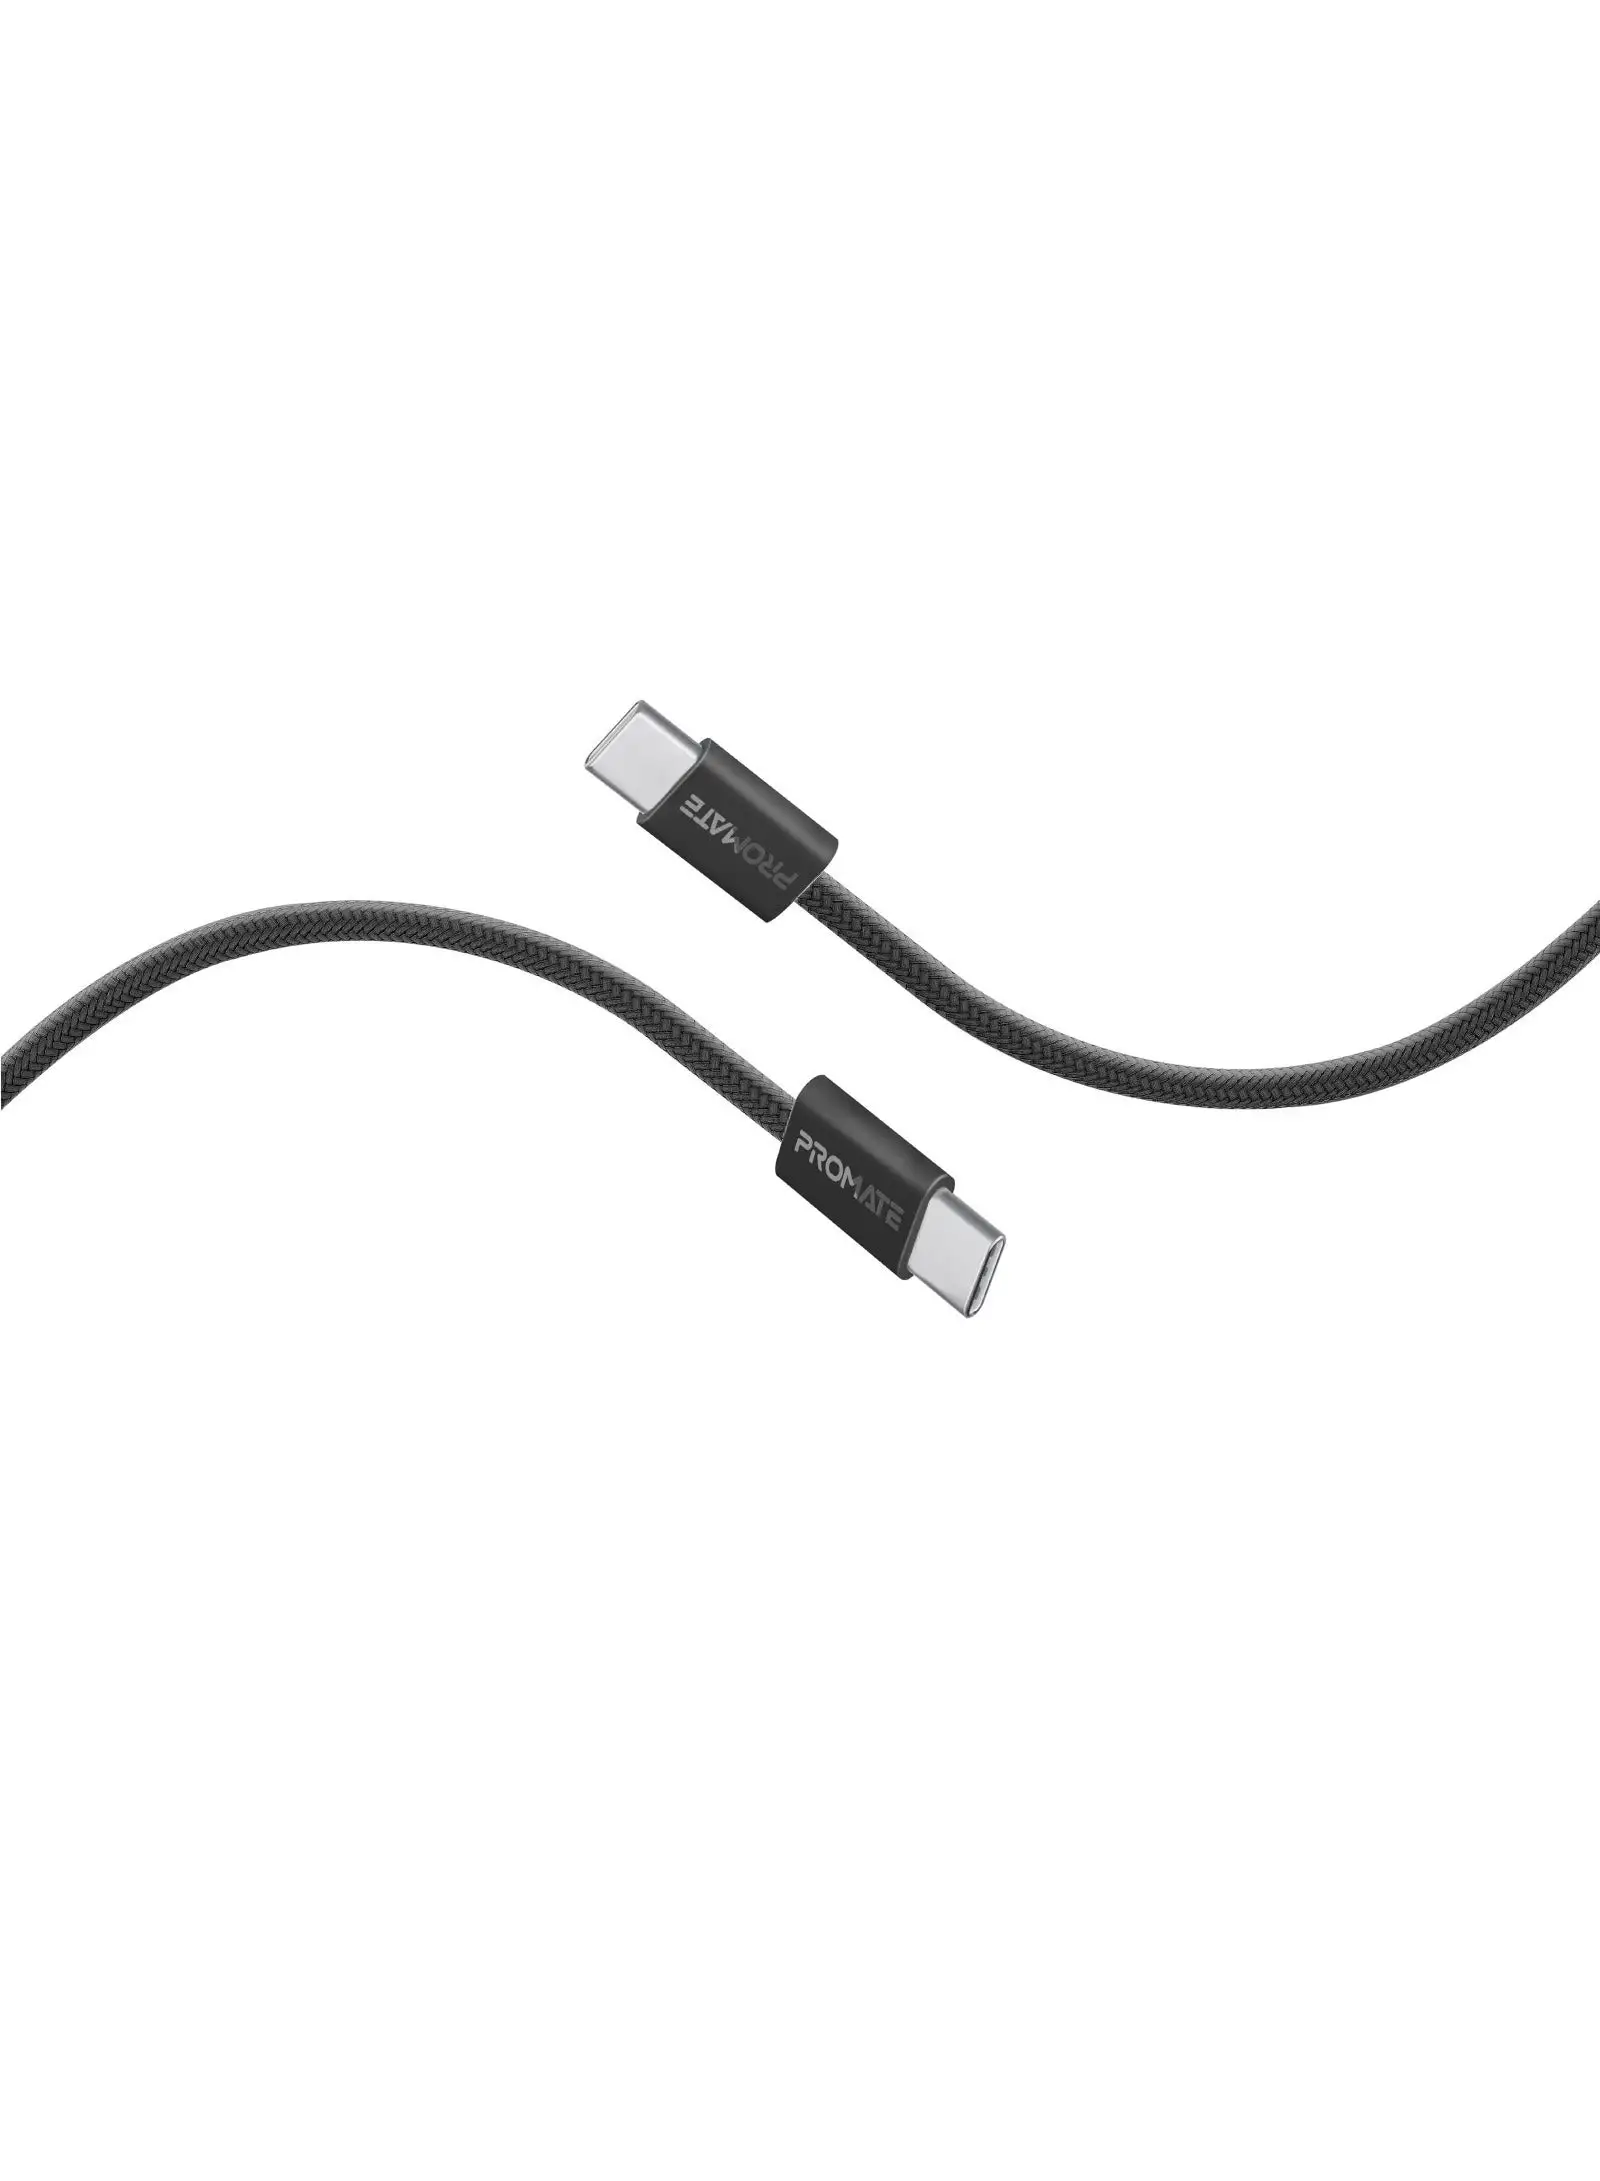 PROMATE USB-C Charging Cable, Powerful Sync Charge Type-C Cable with 60W Fast Power Delivery, 480Mbps Data Transfer and 200cm Tangle-Free Nylon Braided Cord, EcoLine-CC200 Black